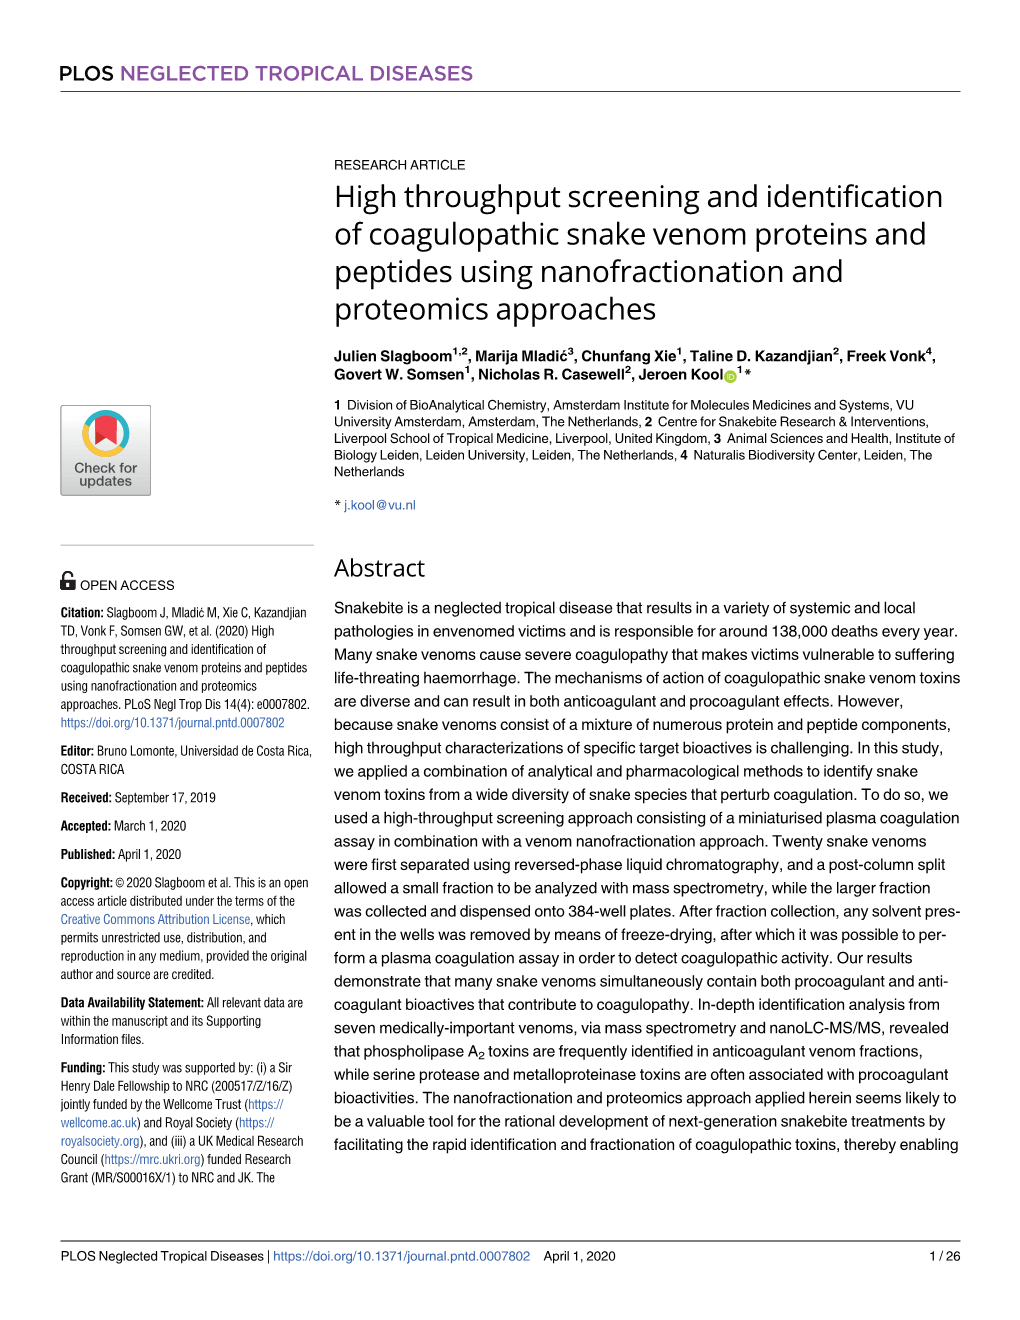 High Throughput Screening and Identification of Coagulopathic Snake Venom Proteins and Peptides Using Nanofractionation and Proteomics Approaches